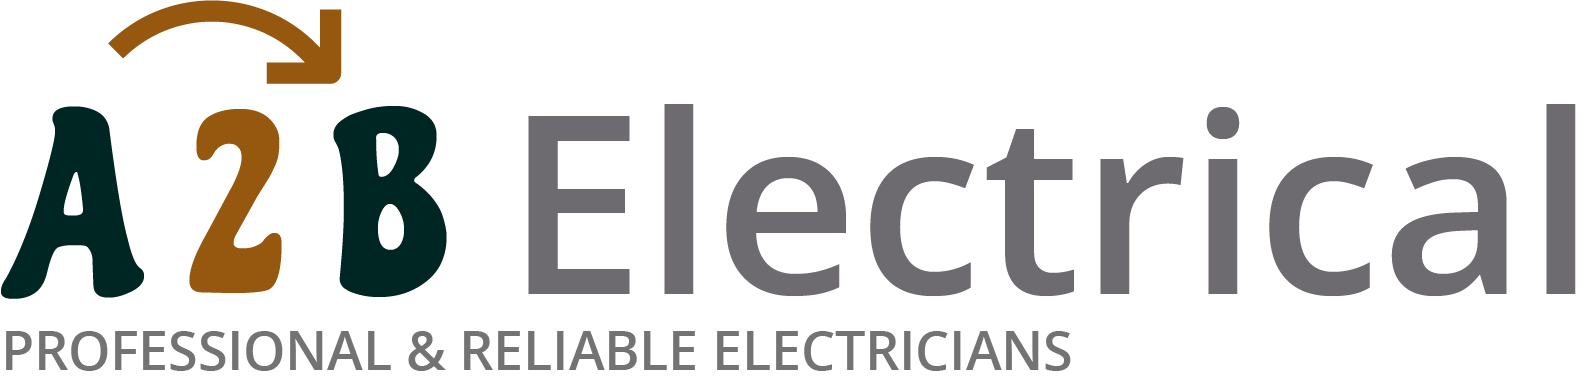 If you have electrical wiring problems in Silvertown, we can provide an electrician to have a look for you. 